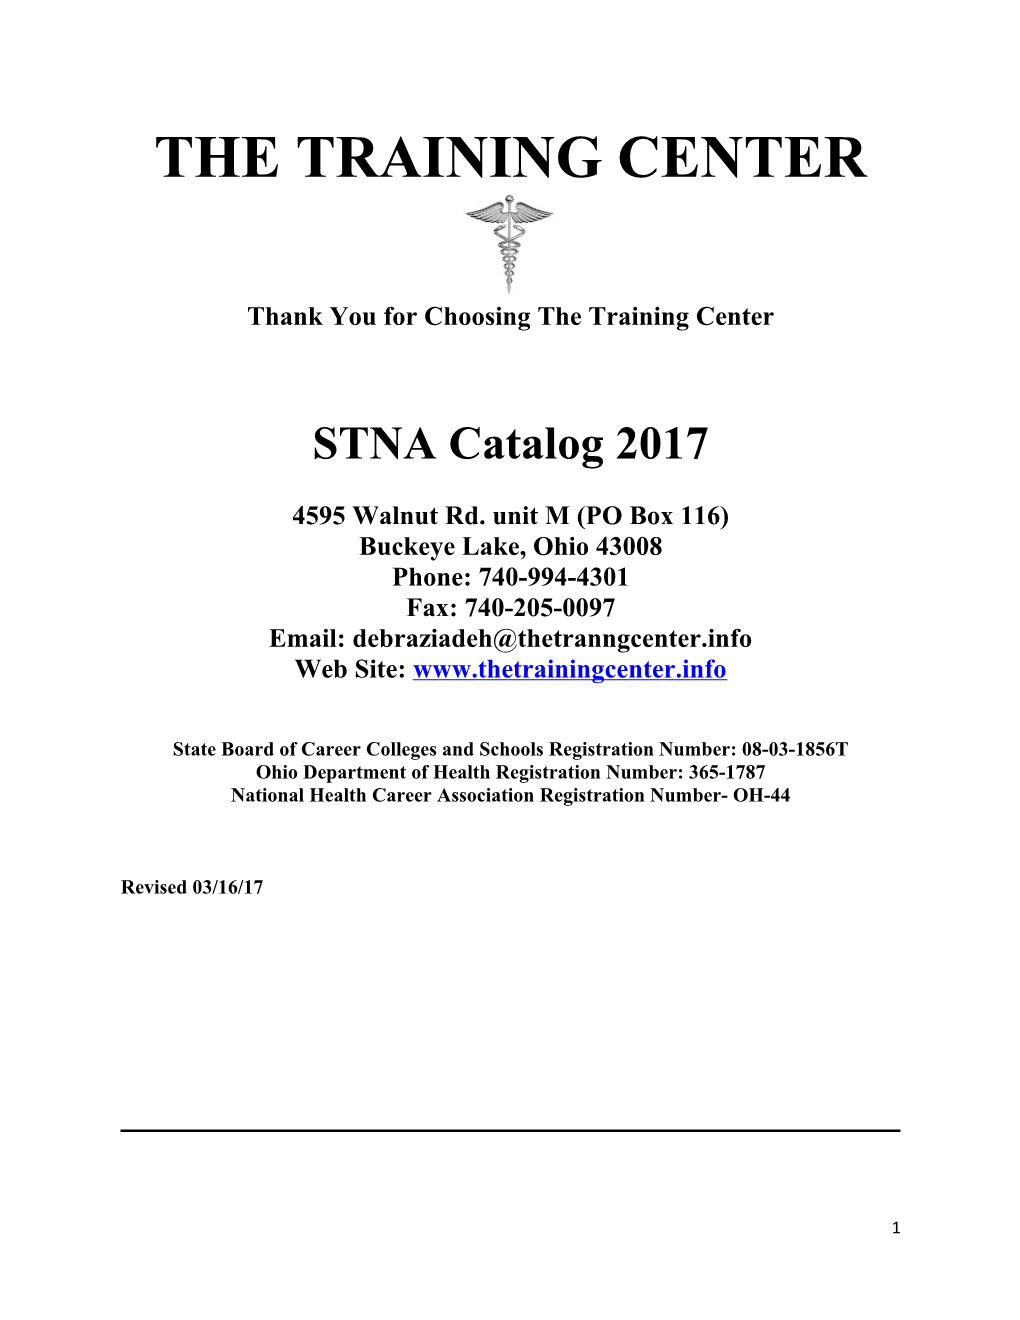 Thank You for Choosing the Training Center